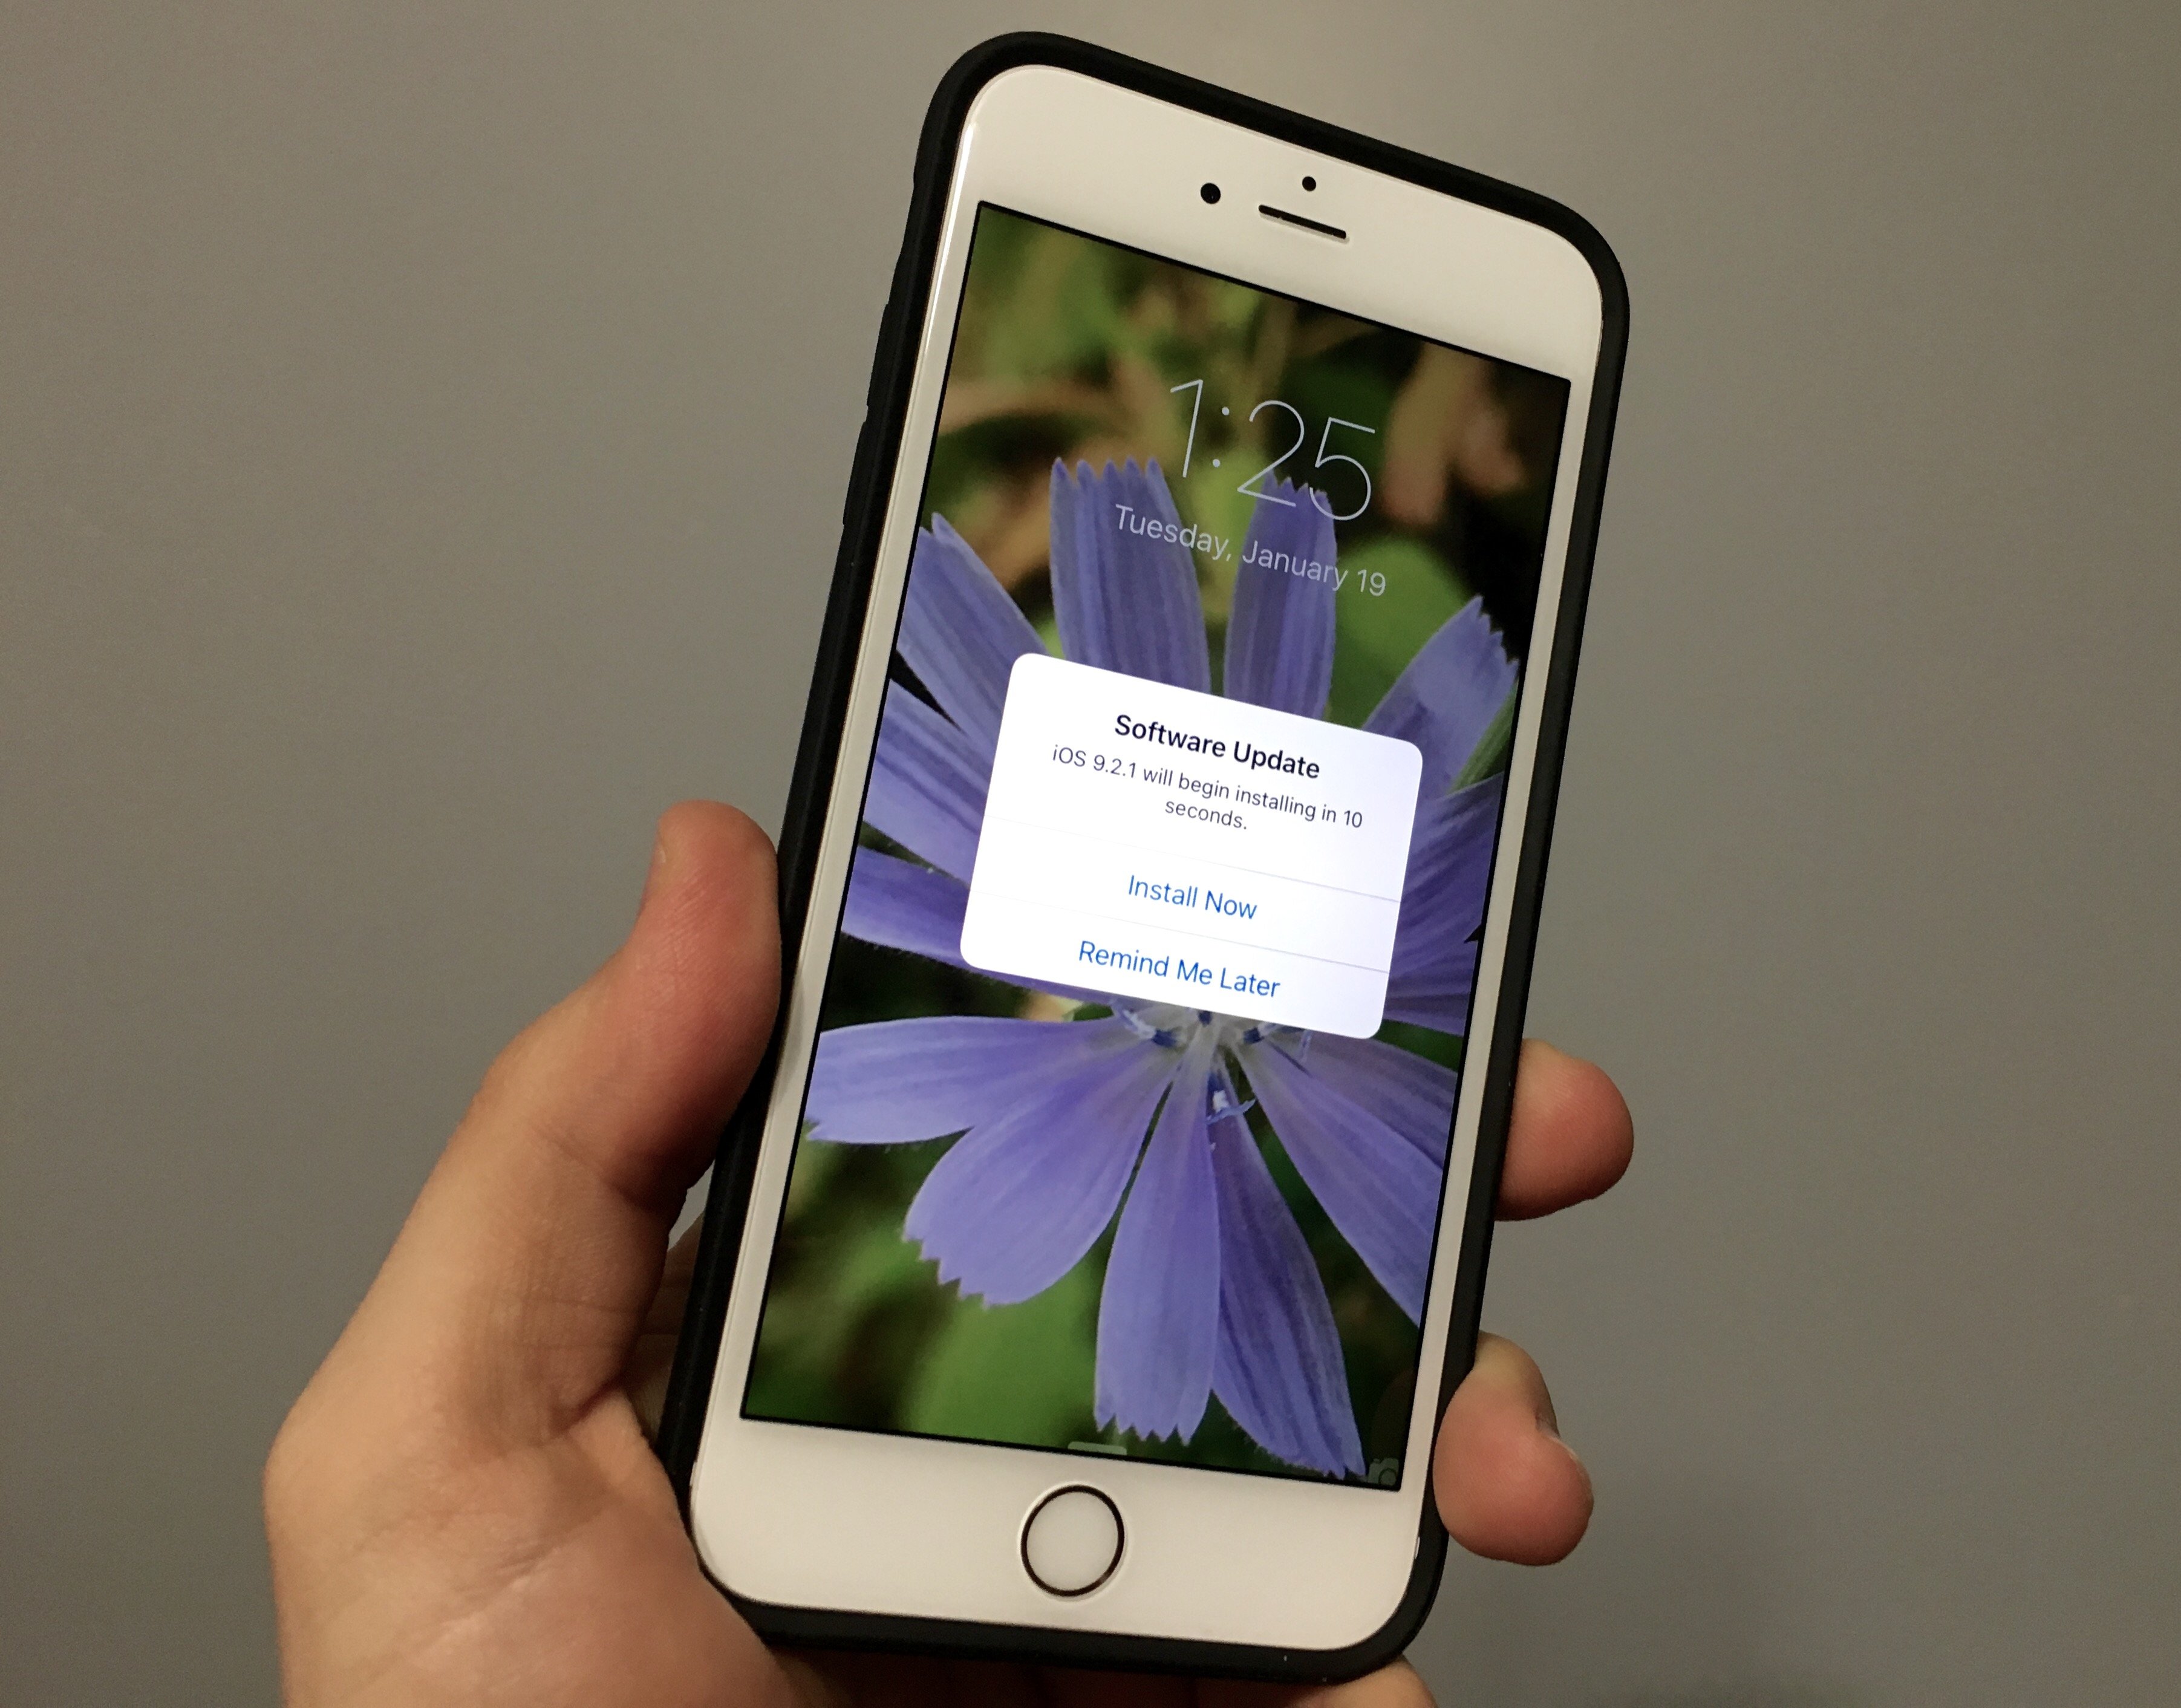 These are the important details you need to know about the iPhone 6s Plus iOS 9.2.1 update.